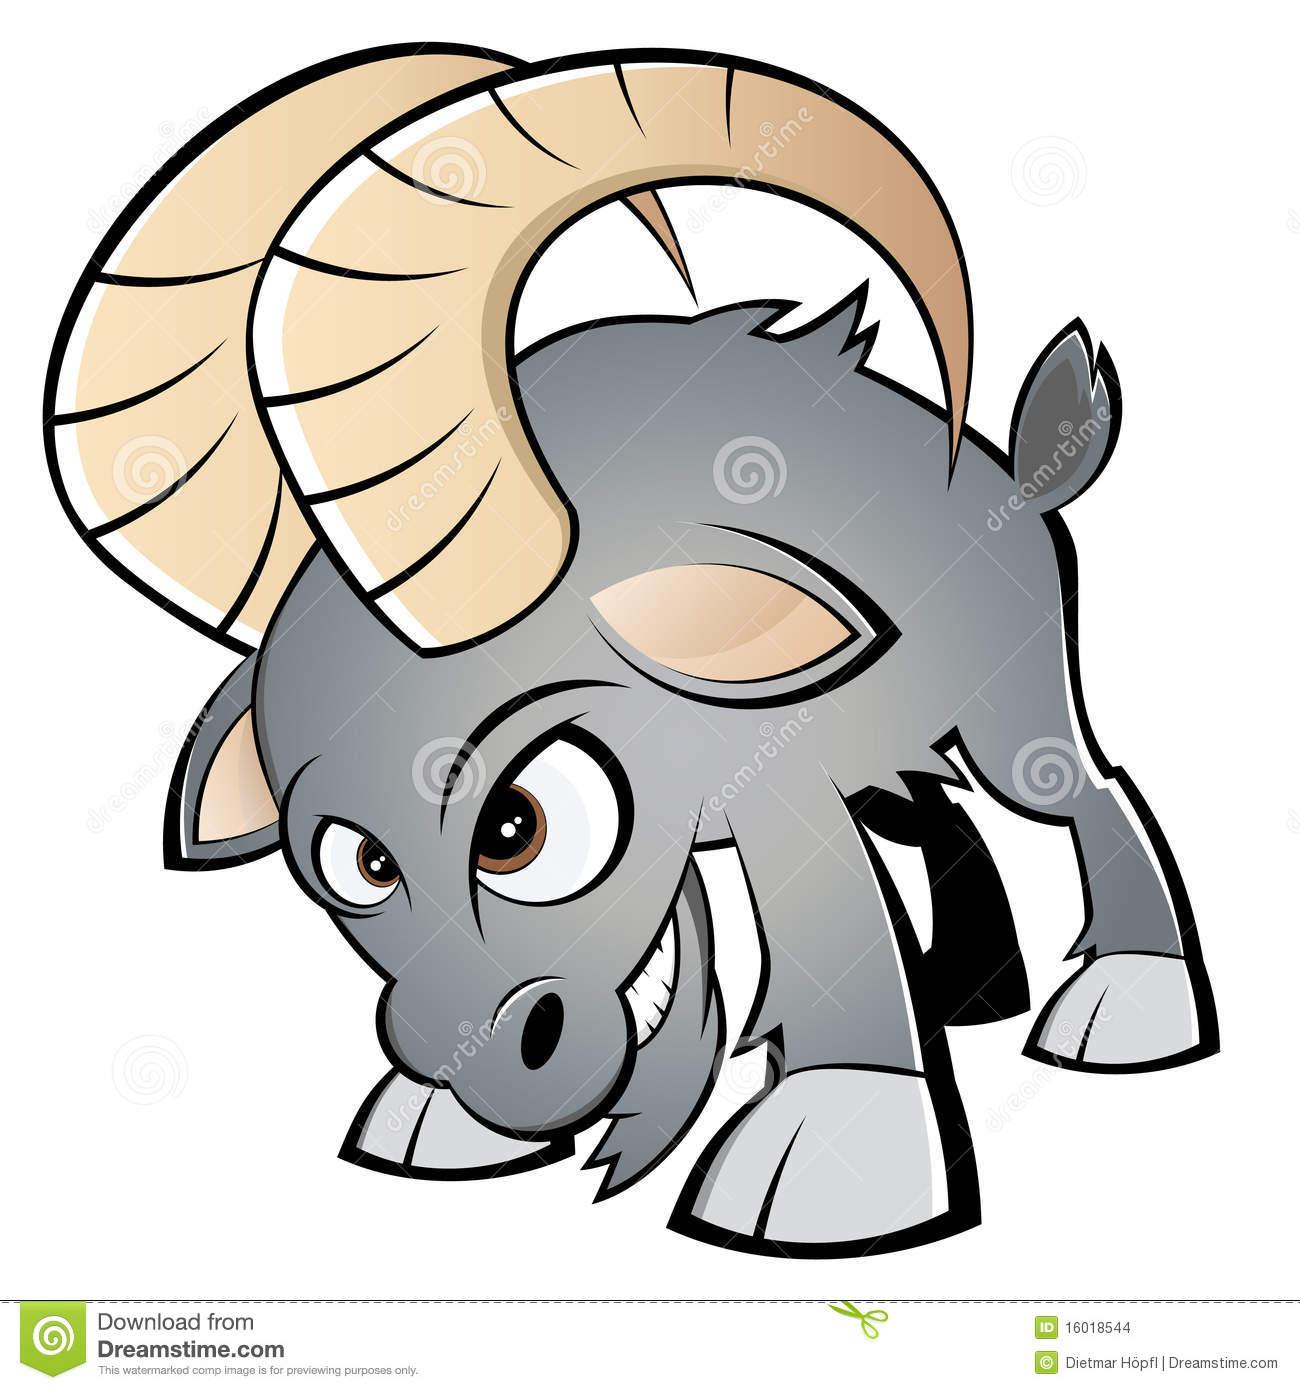 Stock Images  Angry Cartoon Ram  Image  16018544